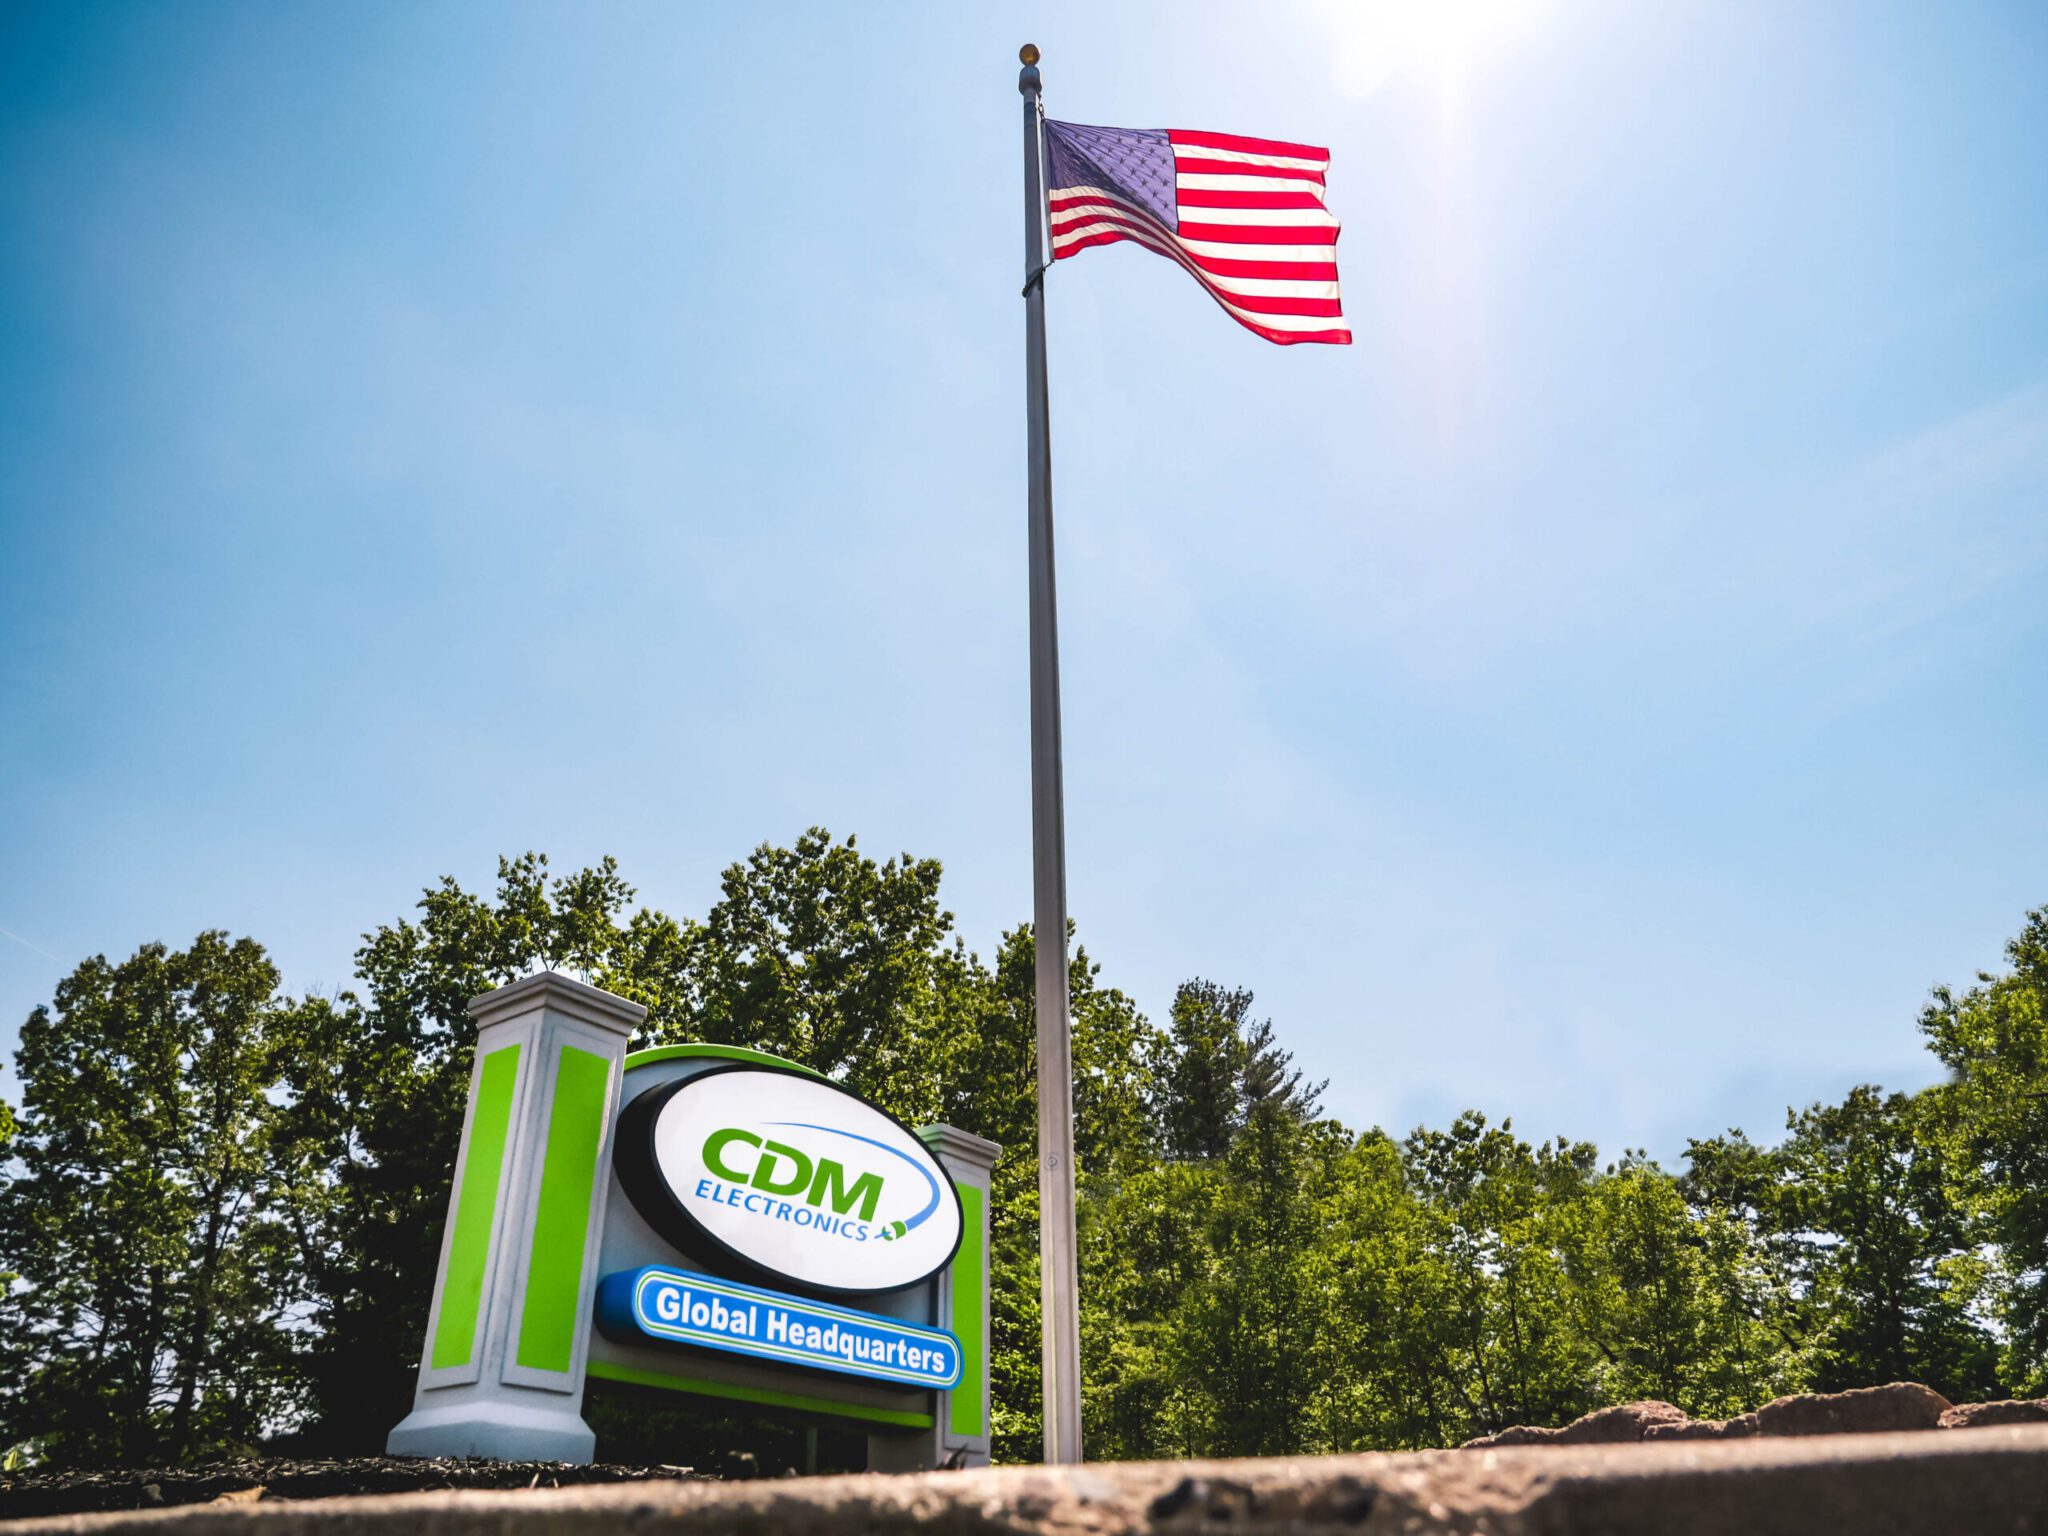 CDM Electronics announced its Turnersville, New Jersey, manufacturing facility has again met the QMS (Quality Management System) requirements of AS9100:2016